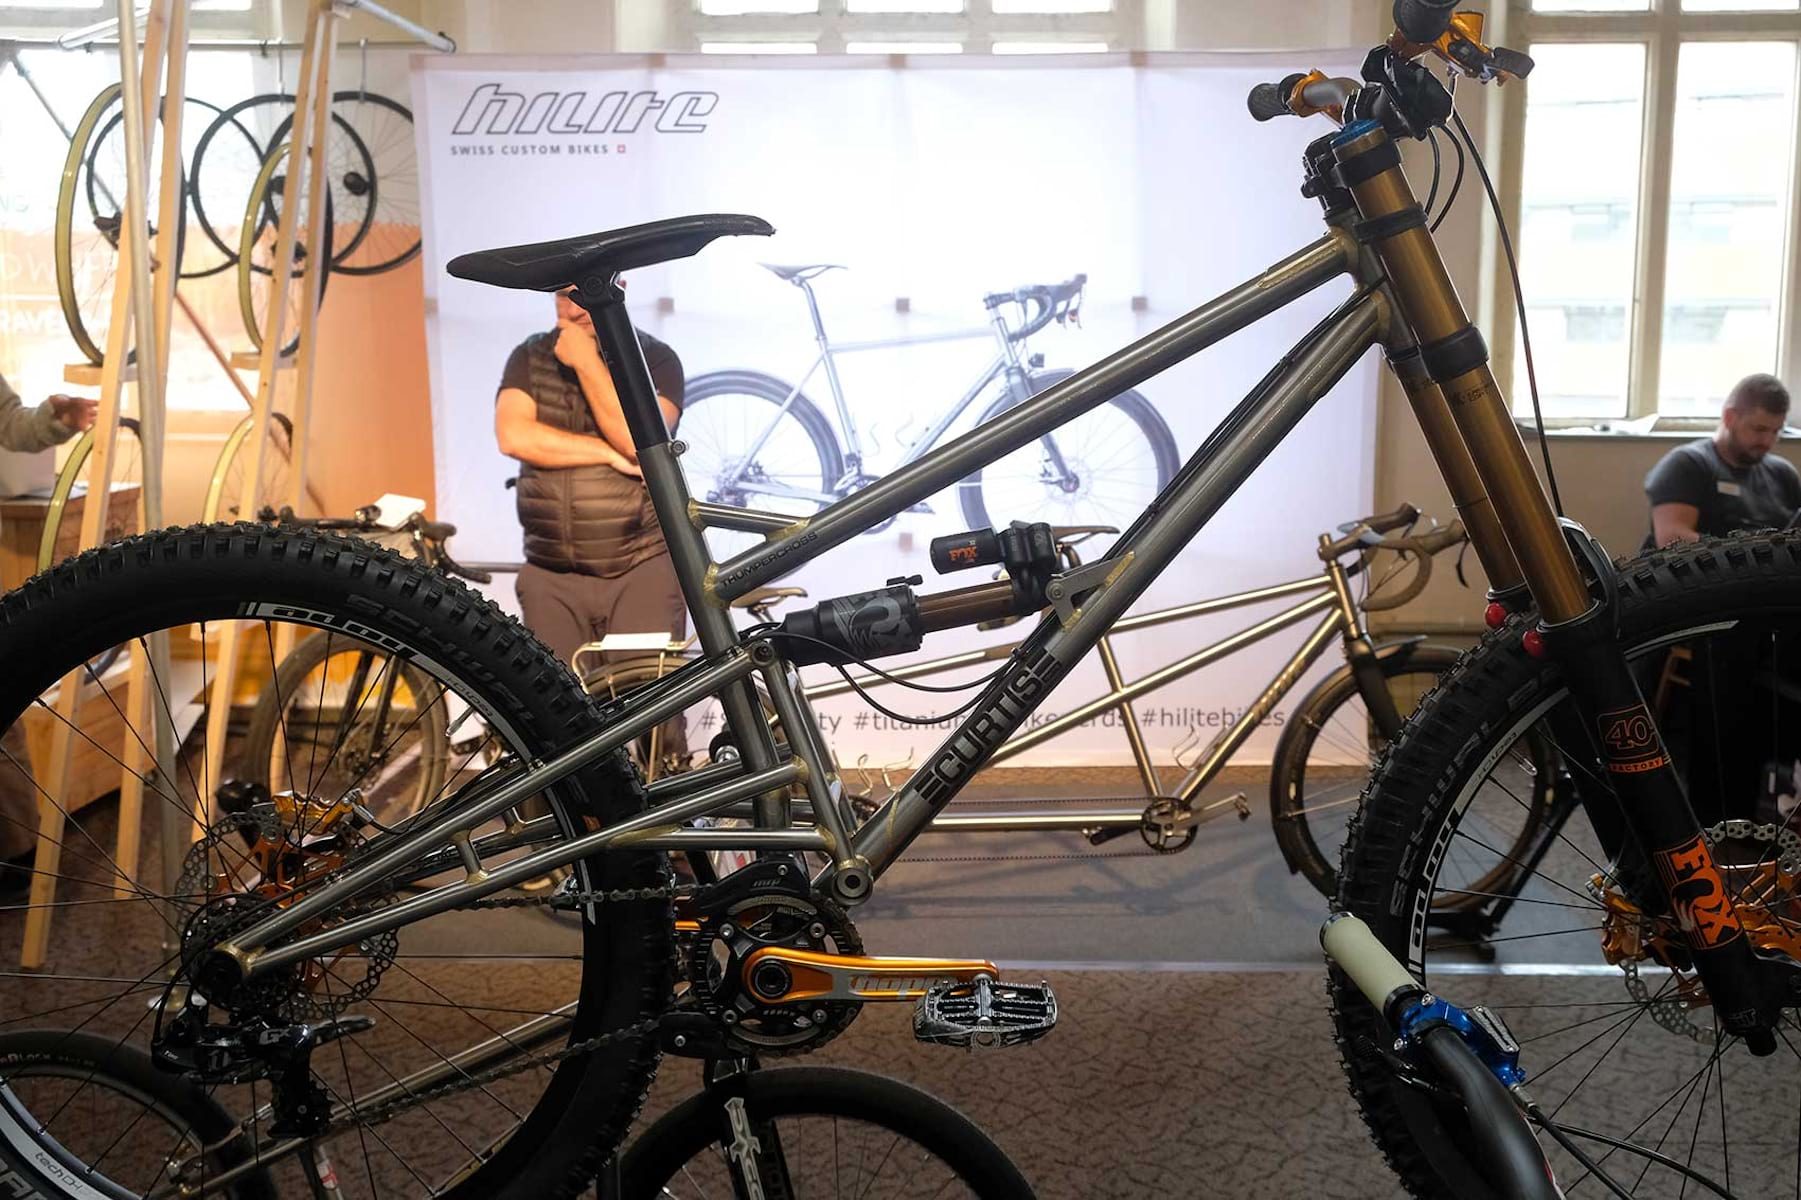 bespoked show 2019 curtis bikes